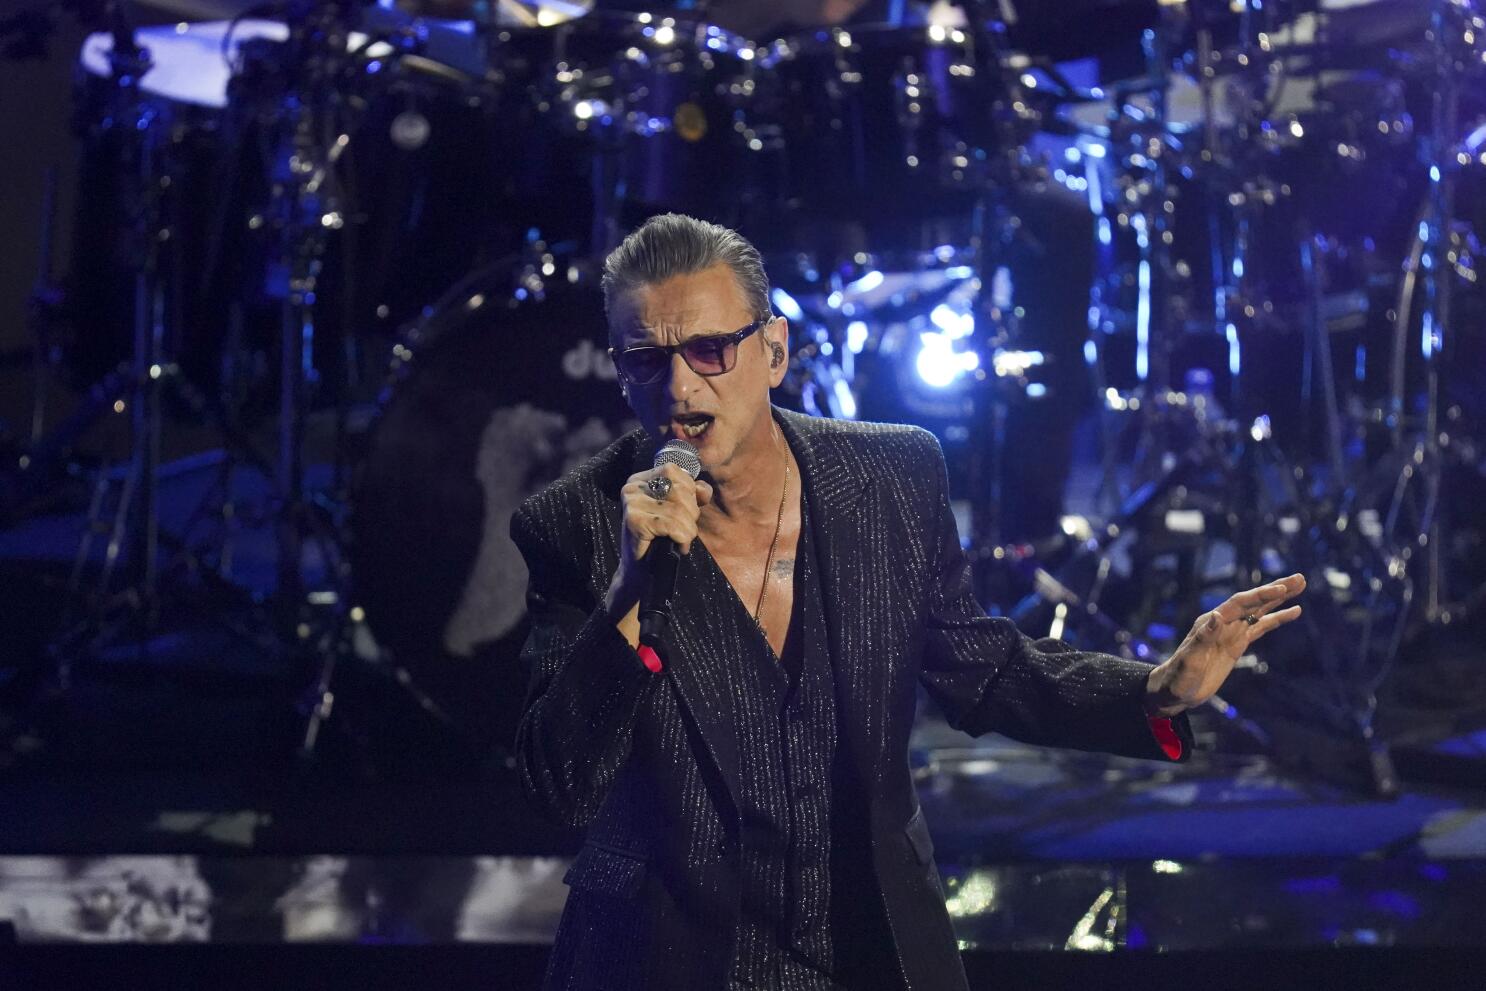 Depeche Mode 2023 World Tour, Ticket Prices And More 